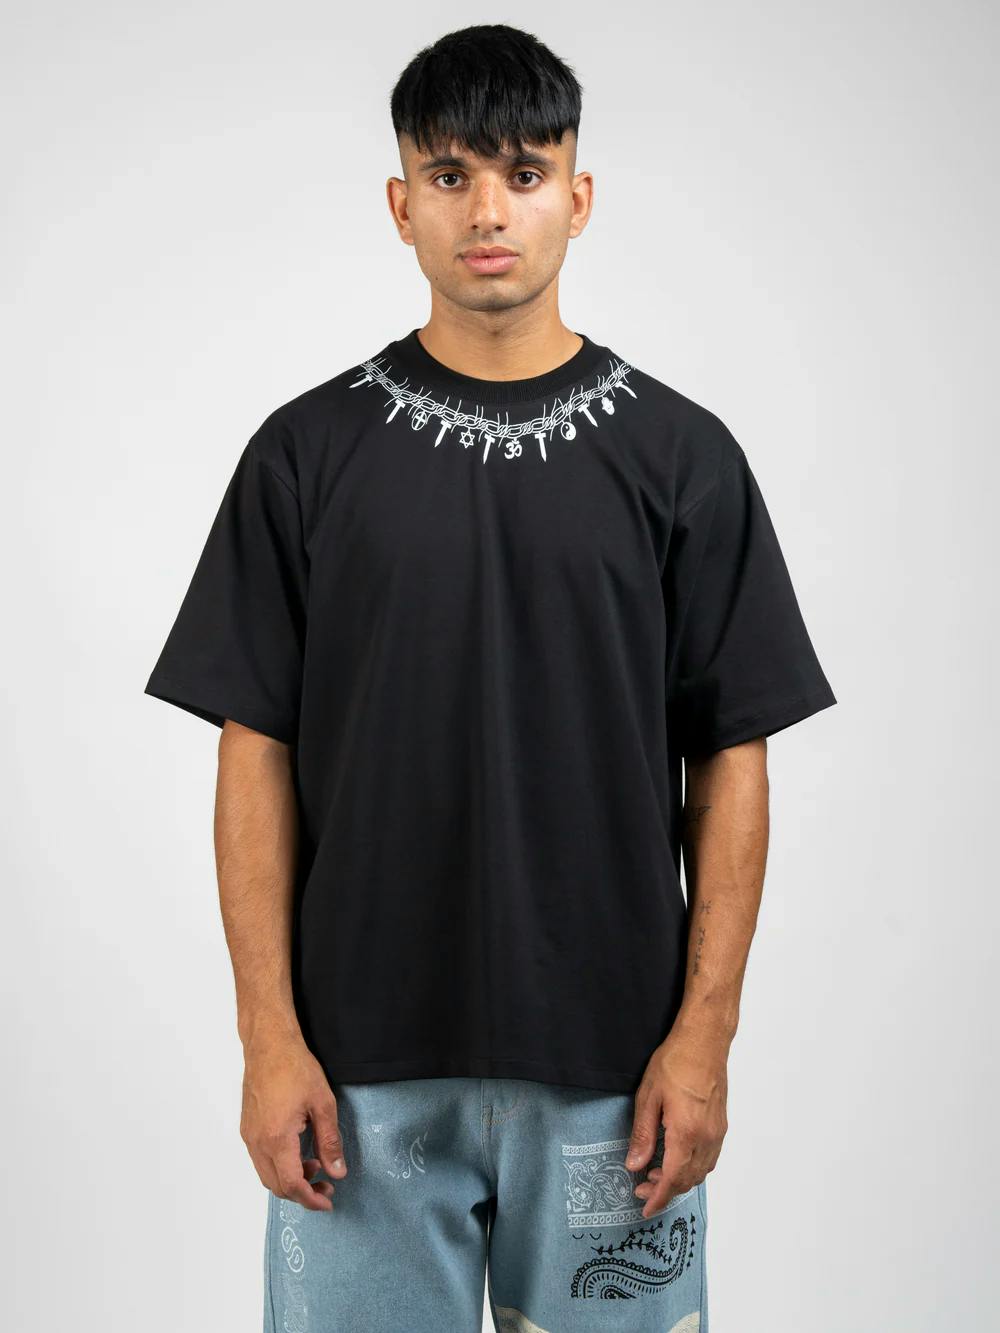 Black Religious Necklace T-shirt, a product by TOFFLE